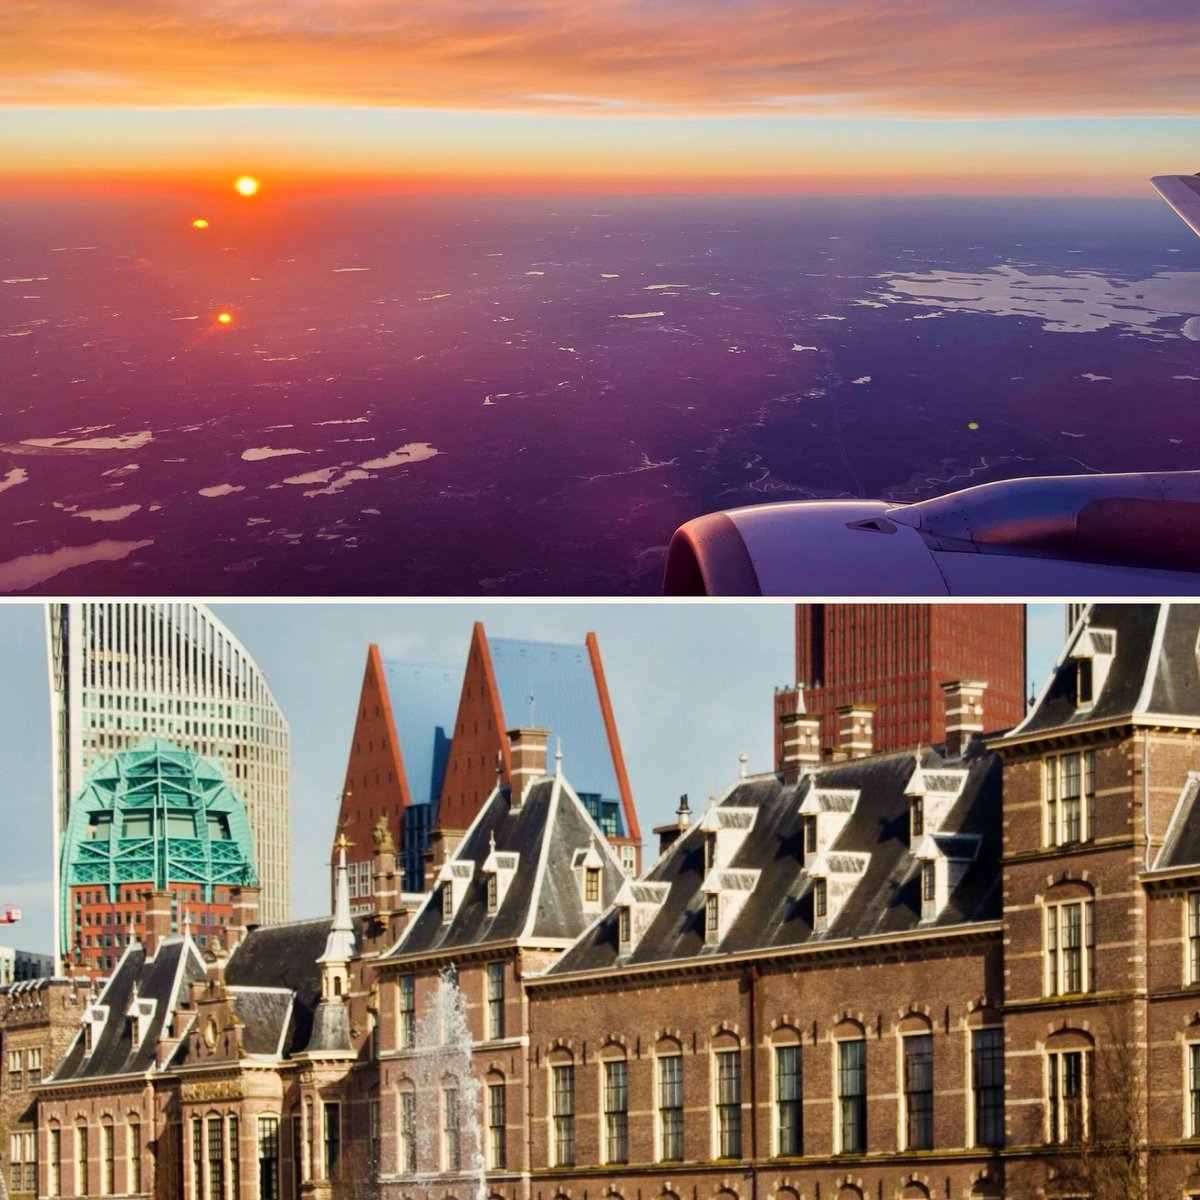 Looking forward to heading to Netherlands 🇳🇱 w/ @The_Termeer_Fdn, MOITI, @MALifeSciences, @NLinBoston to explore & deepen relationship between MA + NL #LifeSciences Ecosystems! Ping me if you’ll be in NL this coming week, would love to connect! #medicine #healthcare #innovation